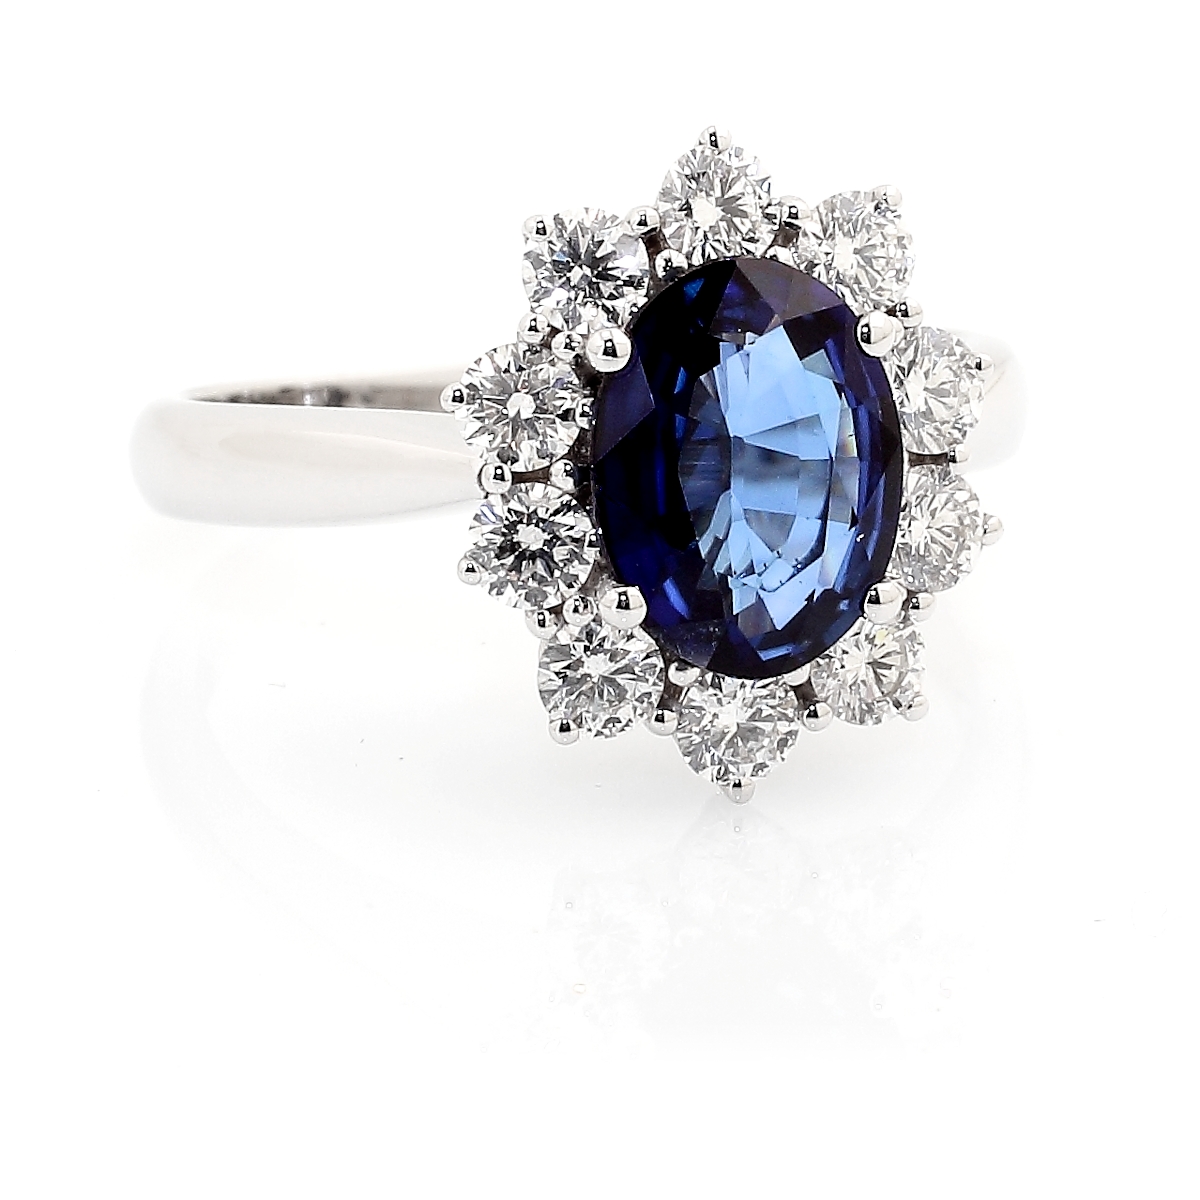 750 Mill. White Gold Ring with 0,80 Ct. Diamonds and 1,80 Ct. Sapphire